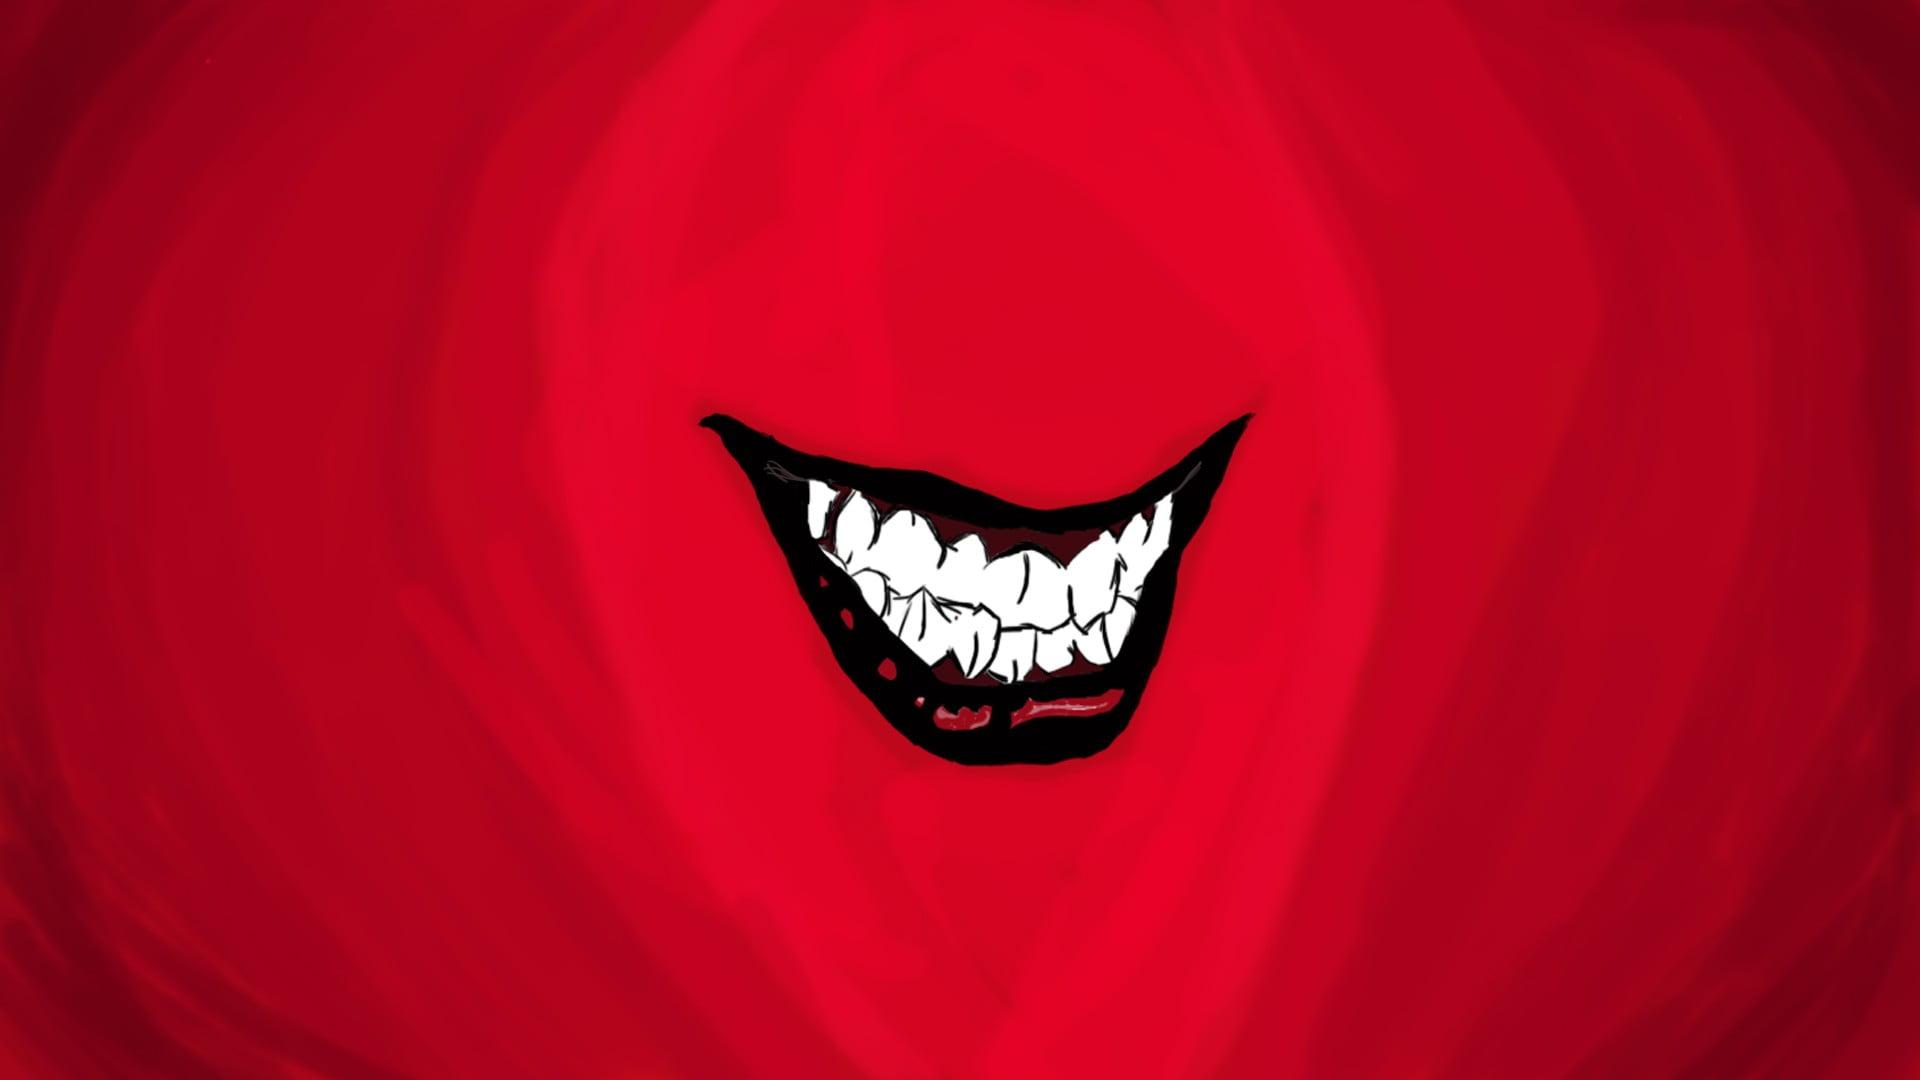 Red, white, and black smiling teeth illustration, Joker, mouth